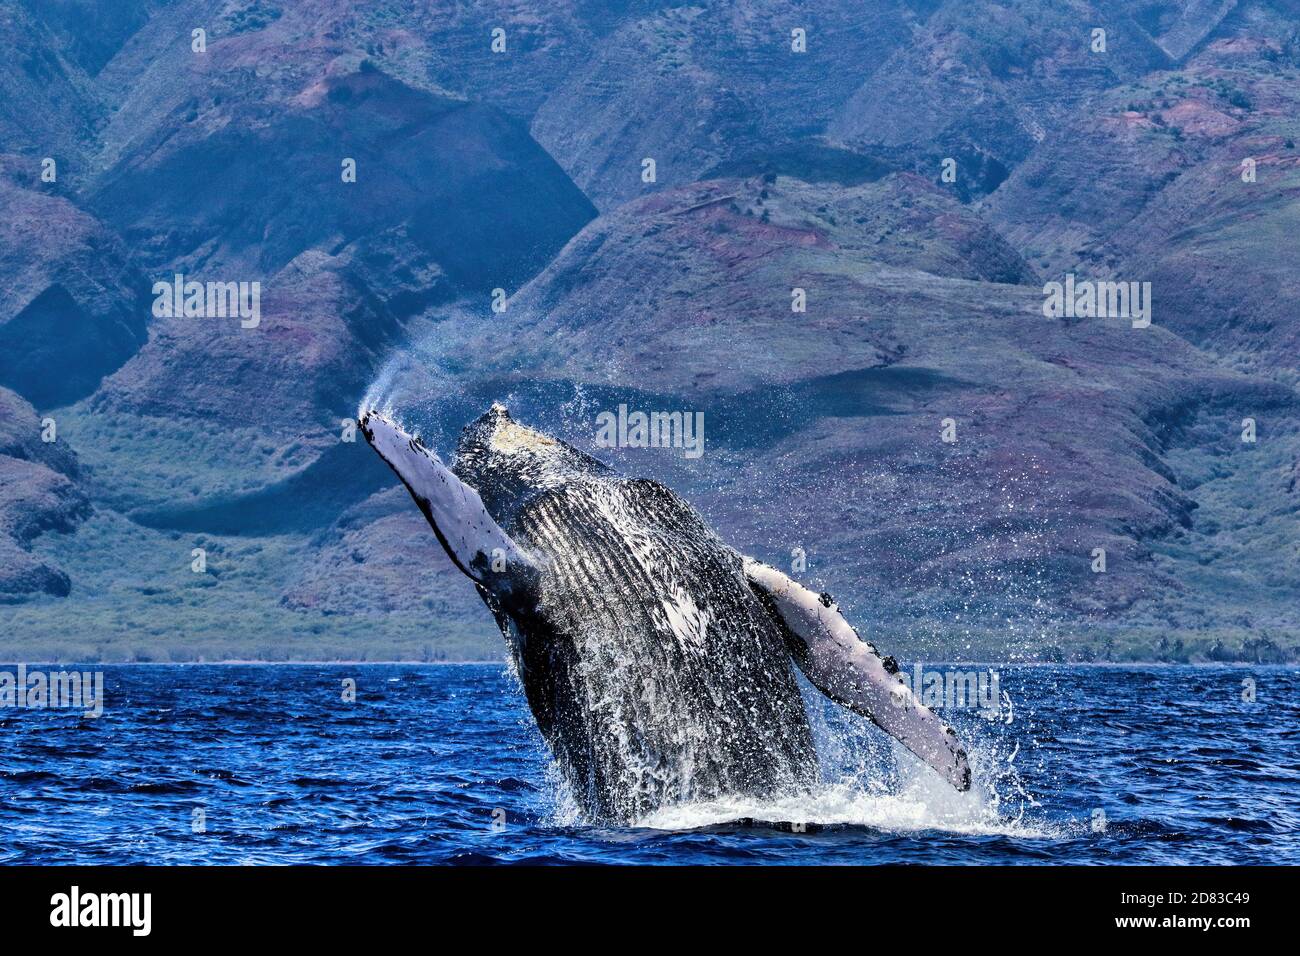 Exuberant breach on Maui by a large humpback whale. Stock Photo